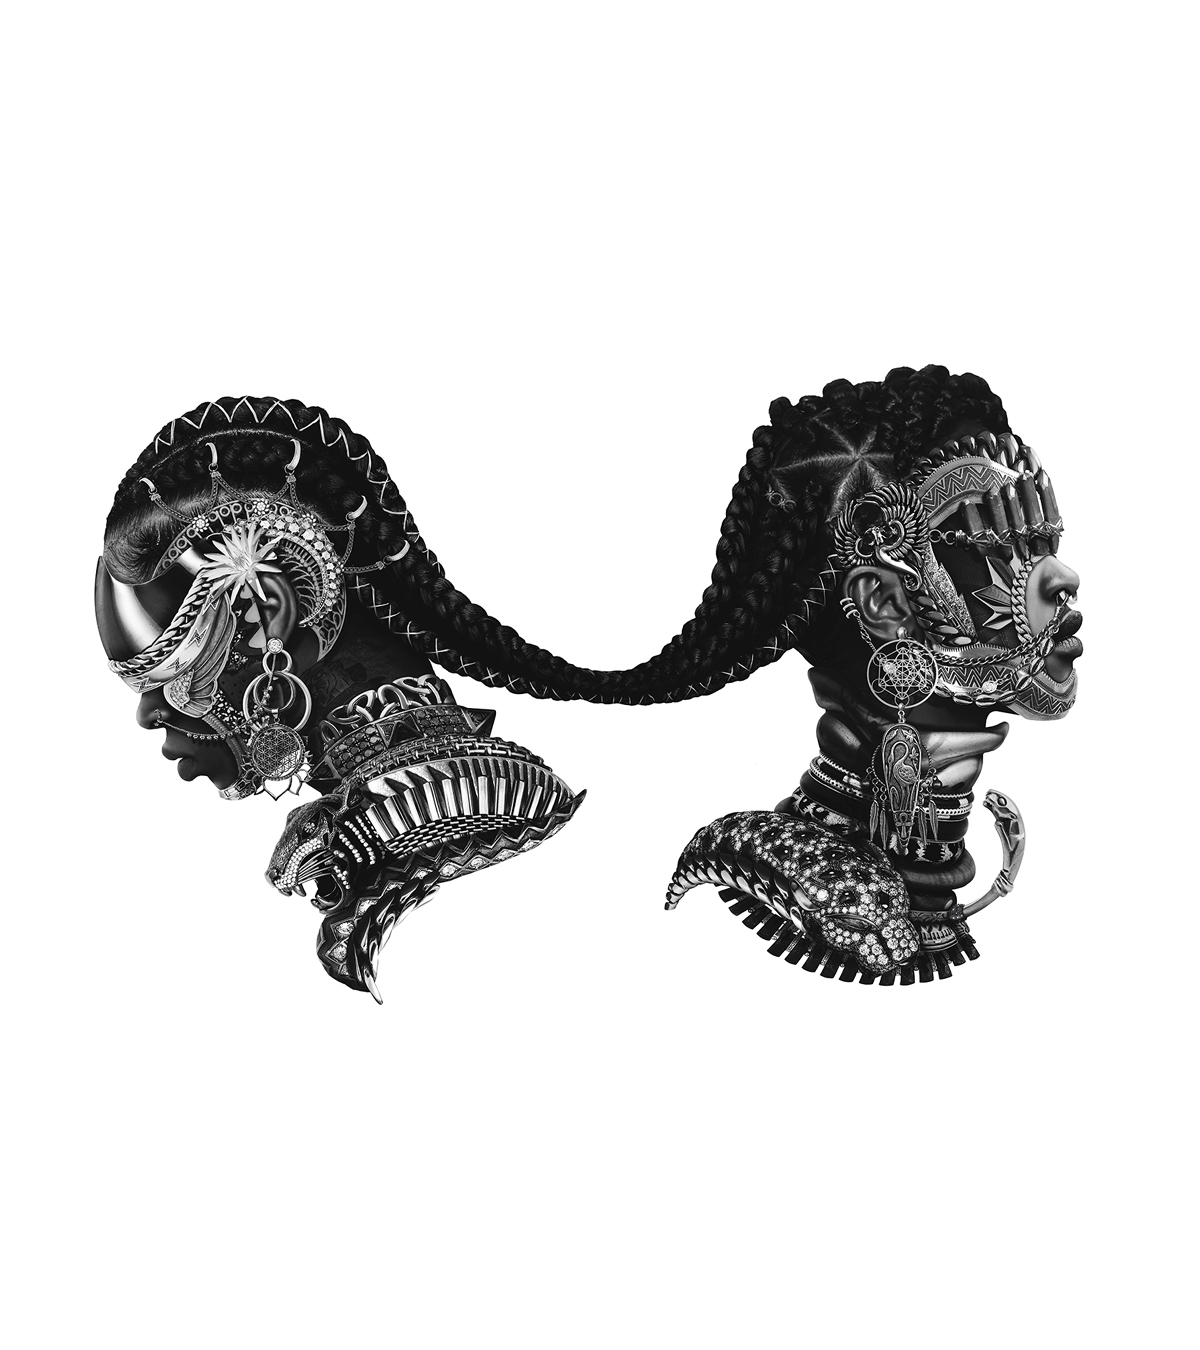 Black and white image of two Black person's head adorned with metal armour and jewelry, connected via a tied braid